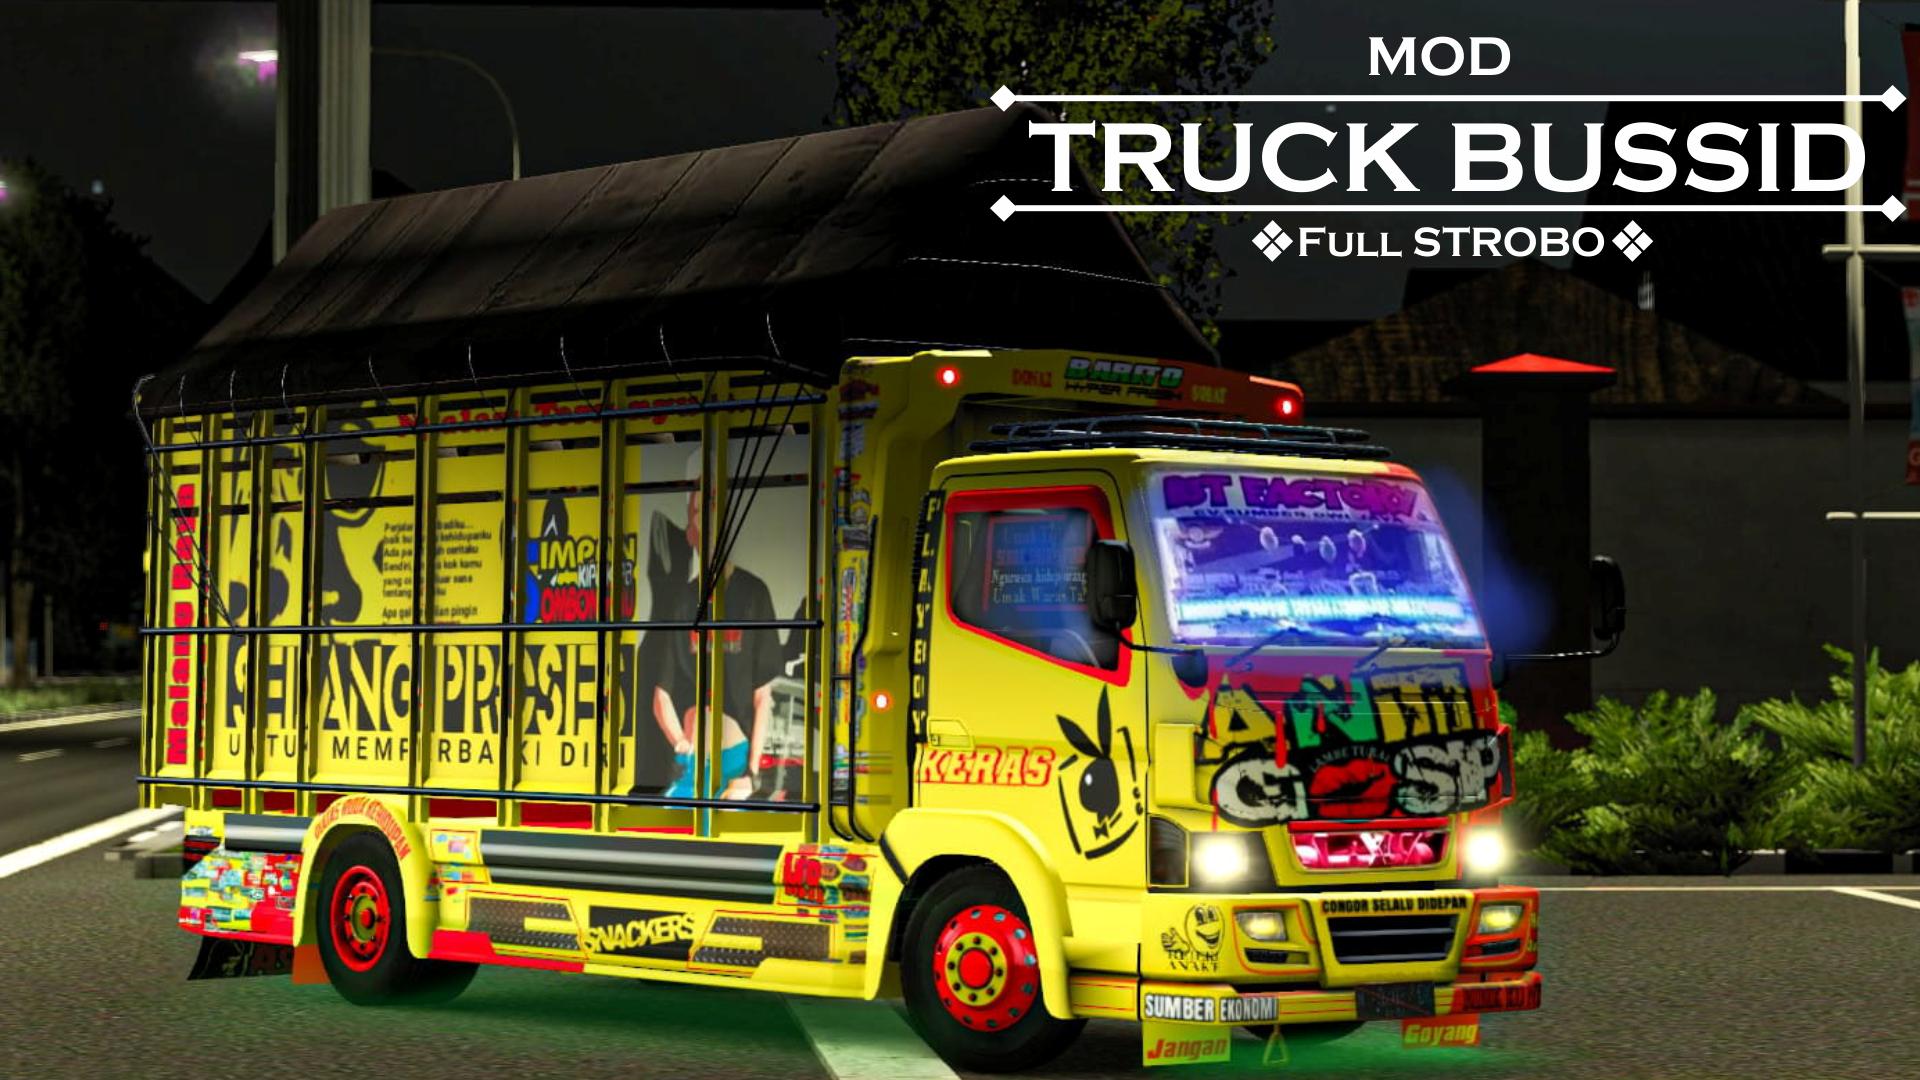 Download Mod Bussid Truck Canter Full Strobo